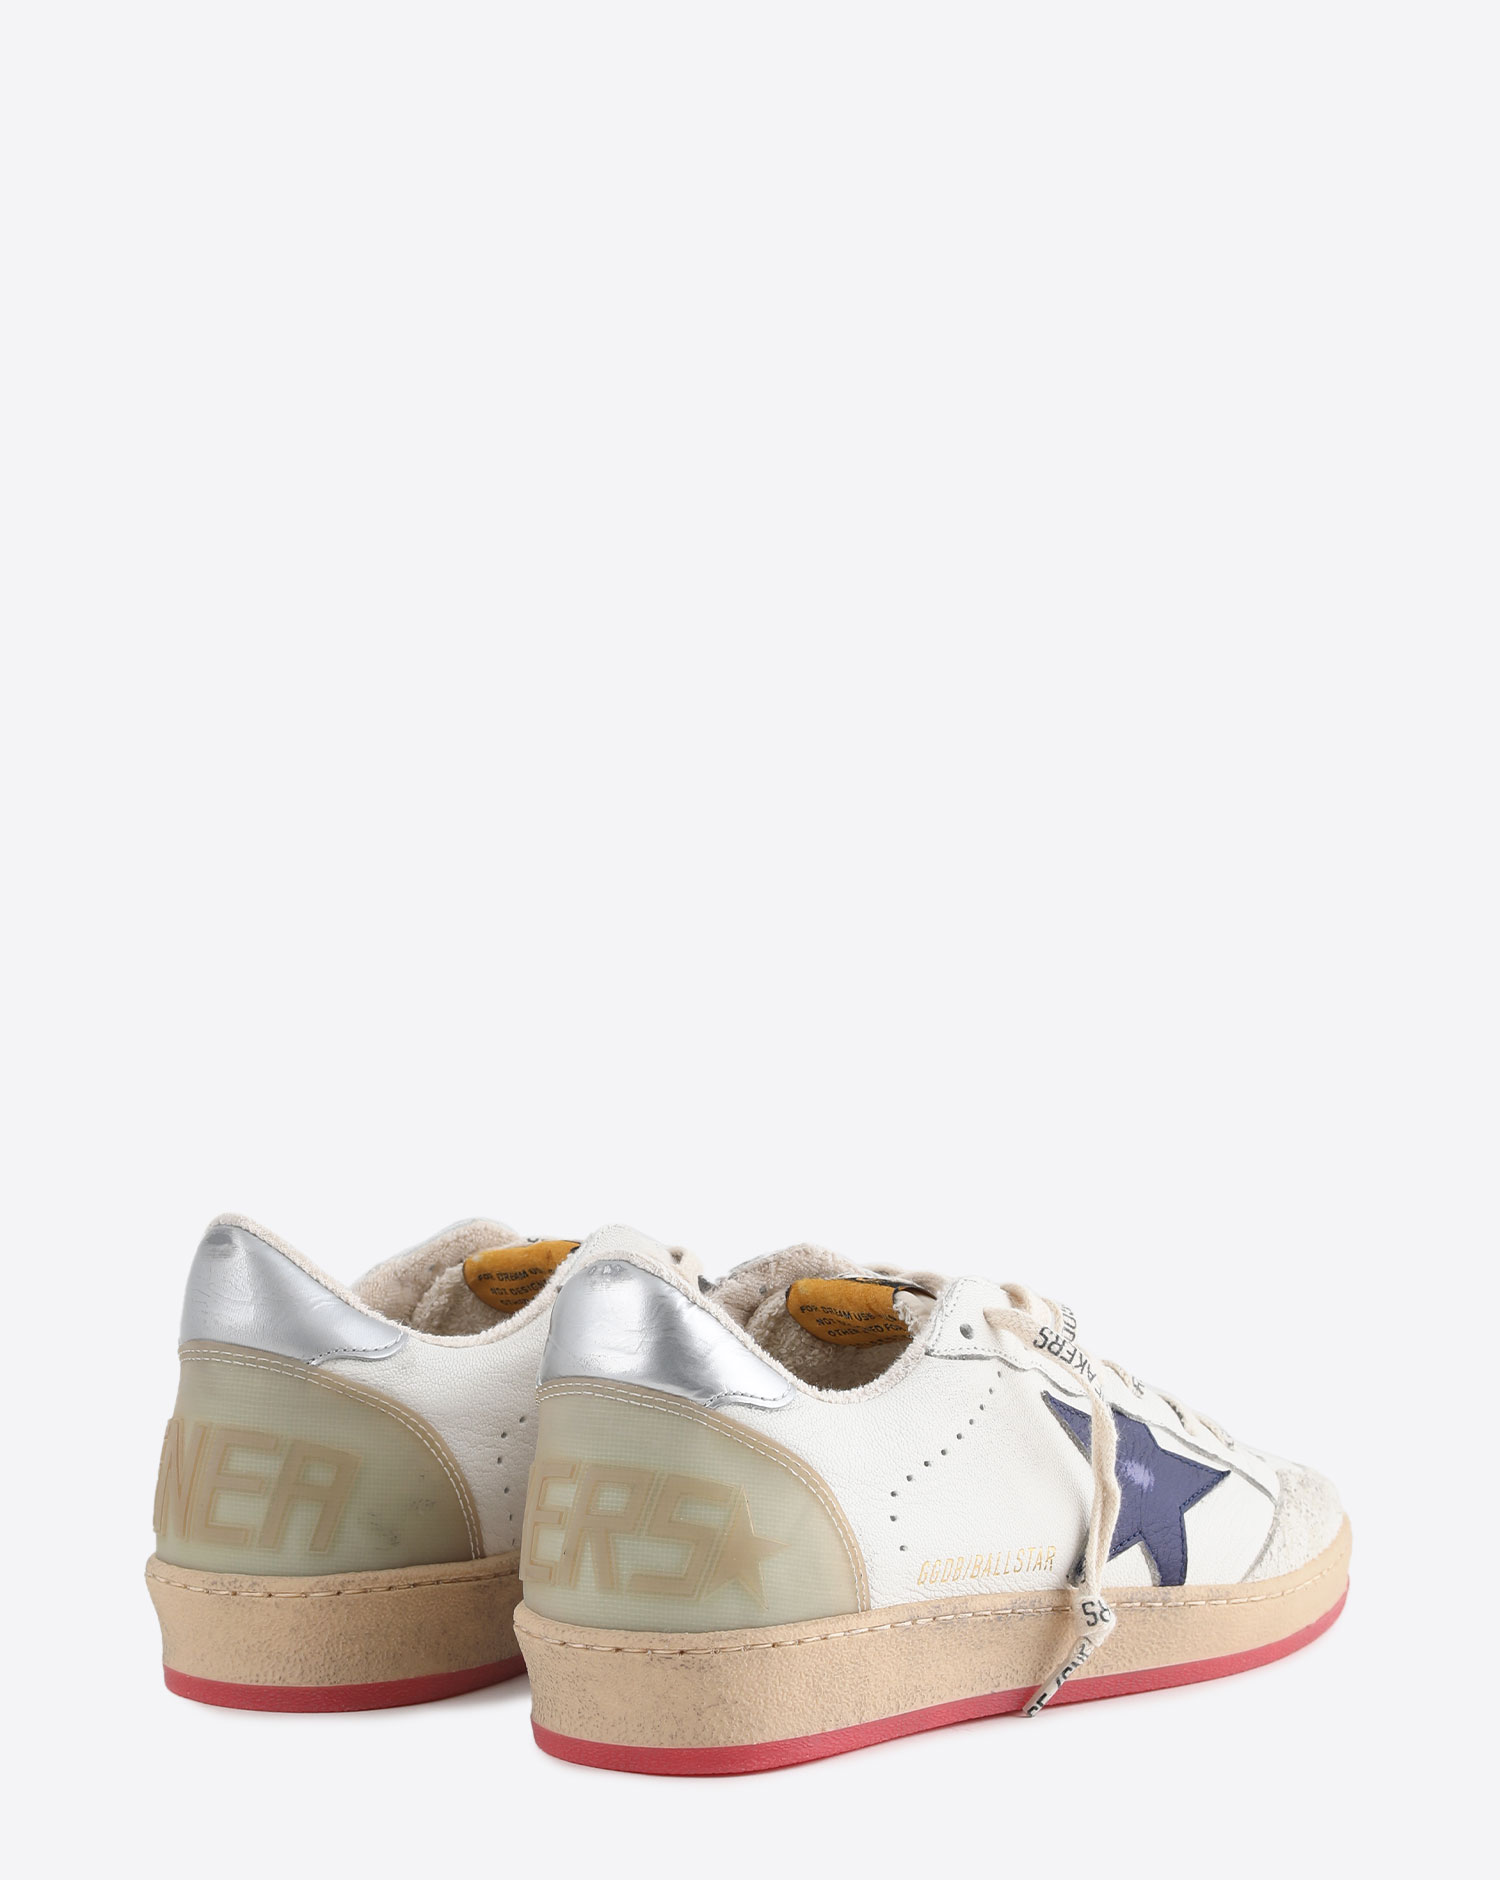 Sneakers Ball Star White Violet Silver 11379  Golden Goose 